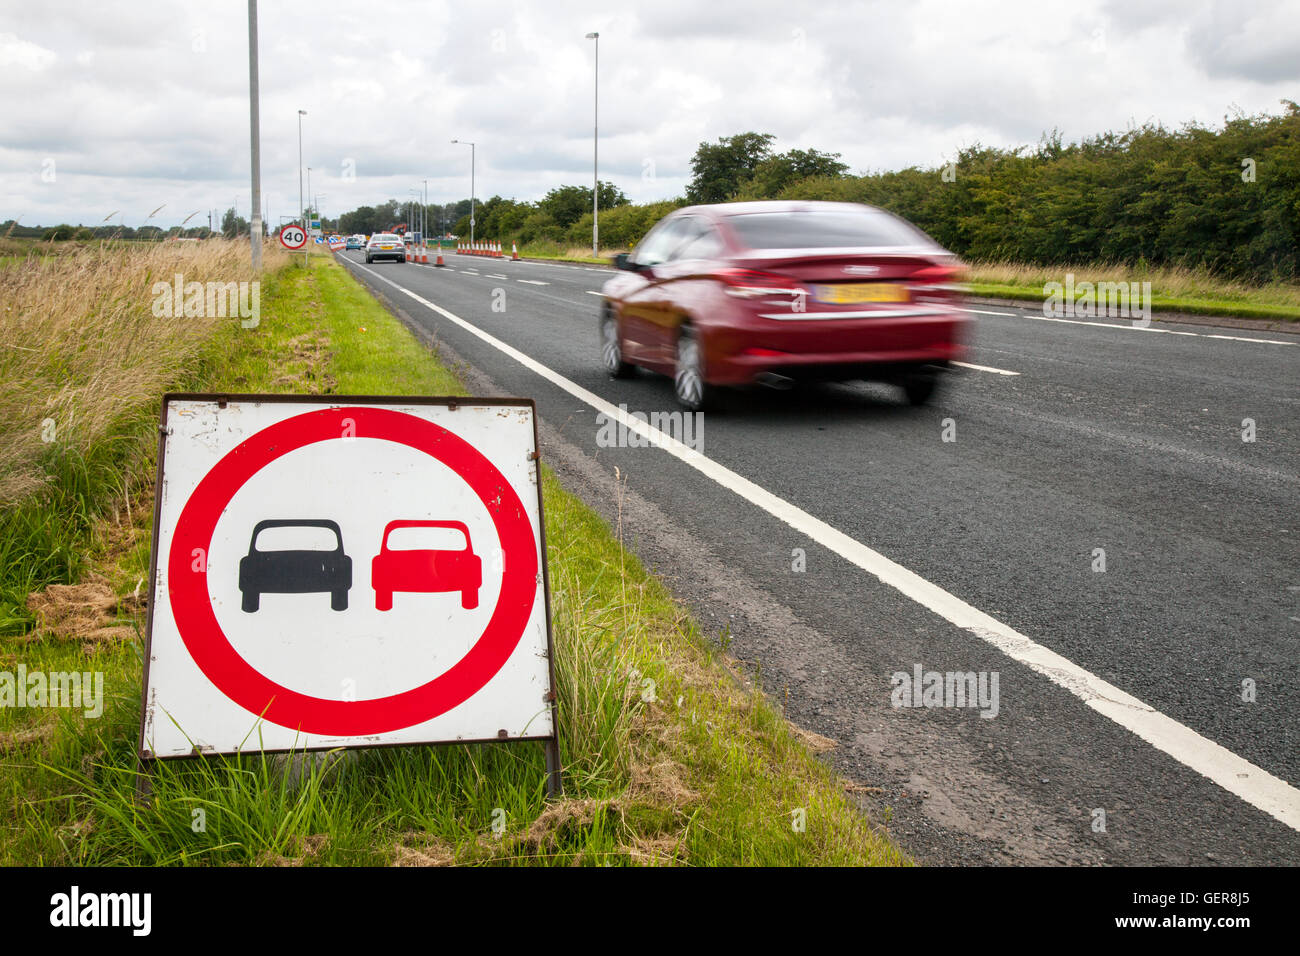 No overtaking signs, road markings, Laws and rules for overtaking in restricted areas; Chapter 8 Traffic Management systems in place on major long-term road works and temporary traffic lights on Preston arterial road, B5253 Flensburg Way in Farington Moss, Lancashire, UK. Stock Photo